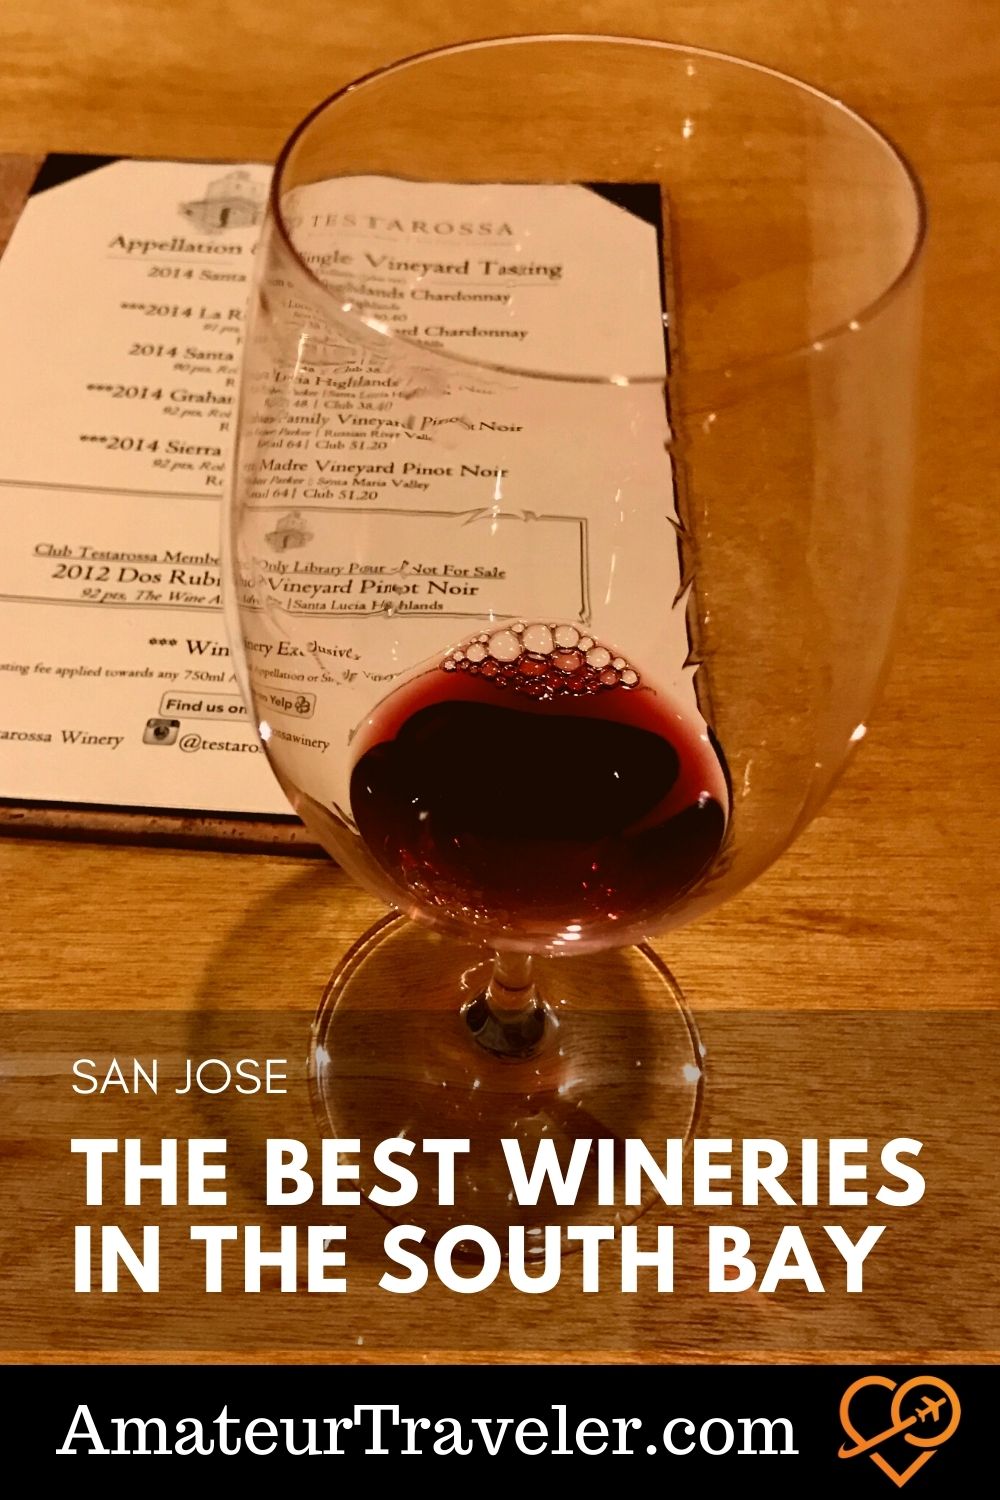 San Jose Wineries - The Best Wineries in the South Bay #san-jose #california #wine #winery #travel #trip #vacation